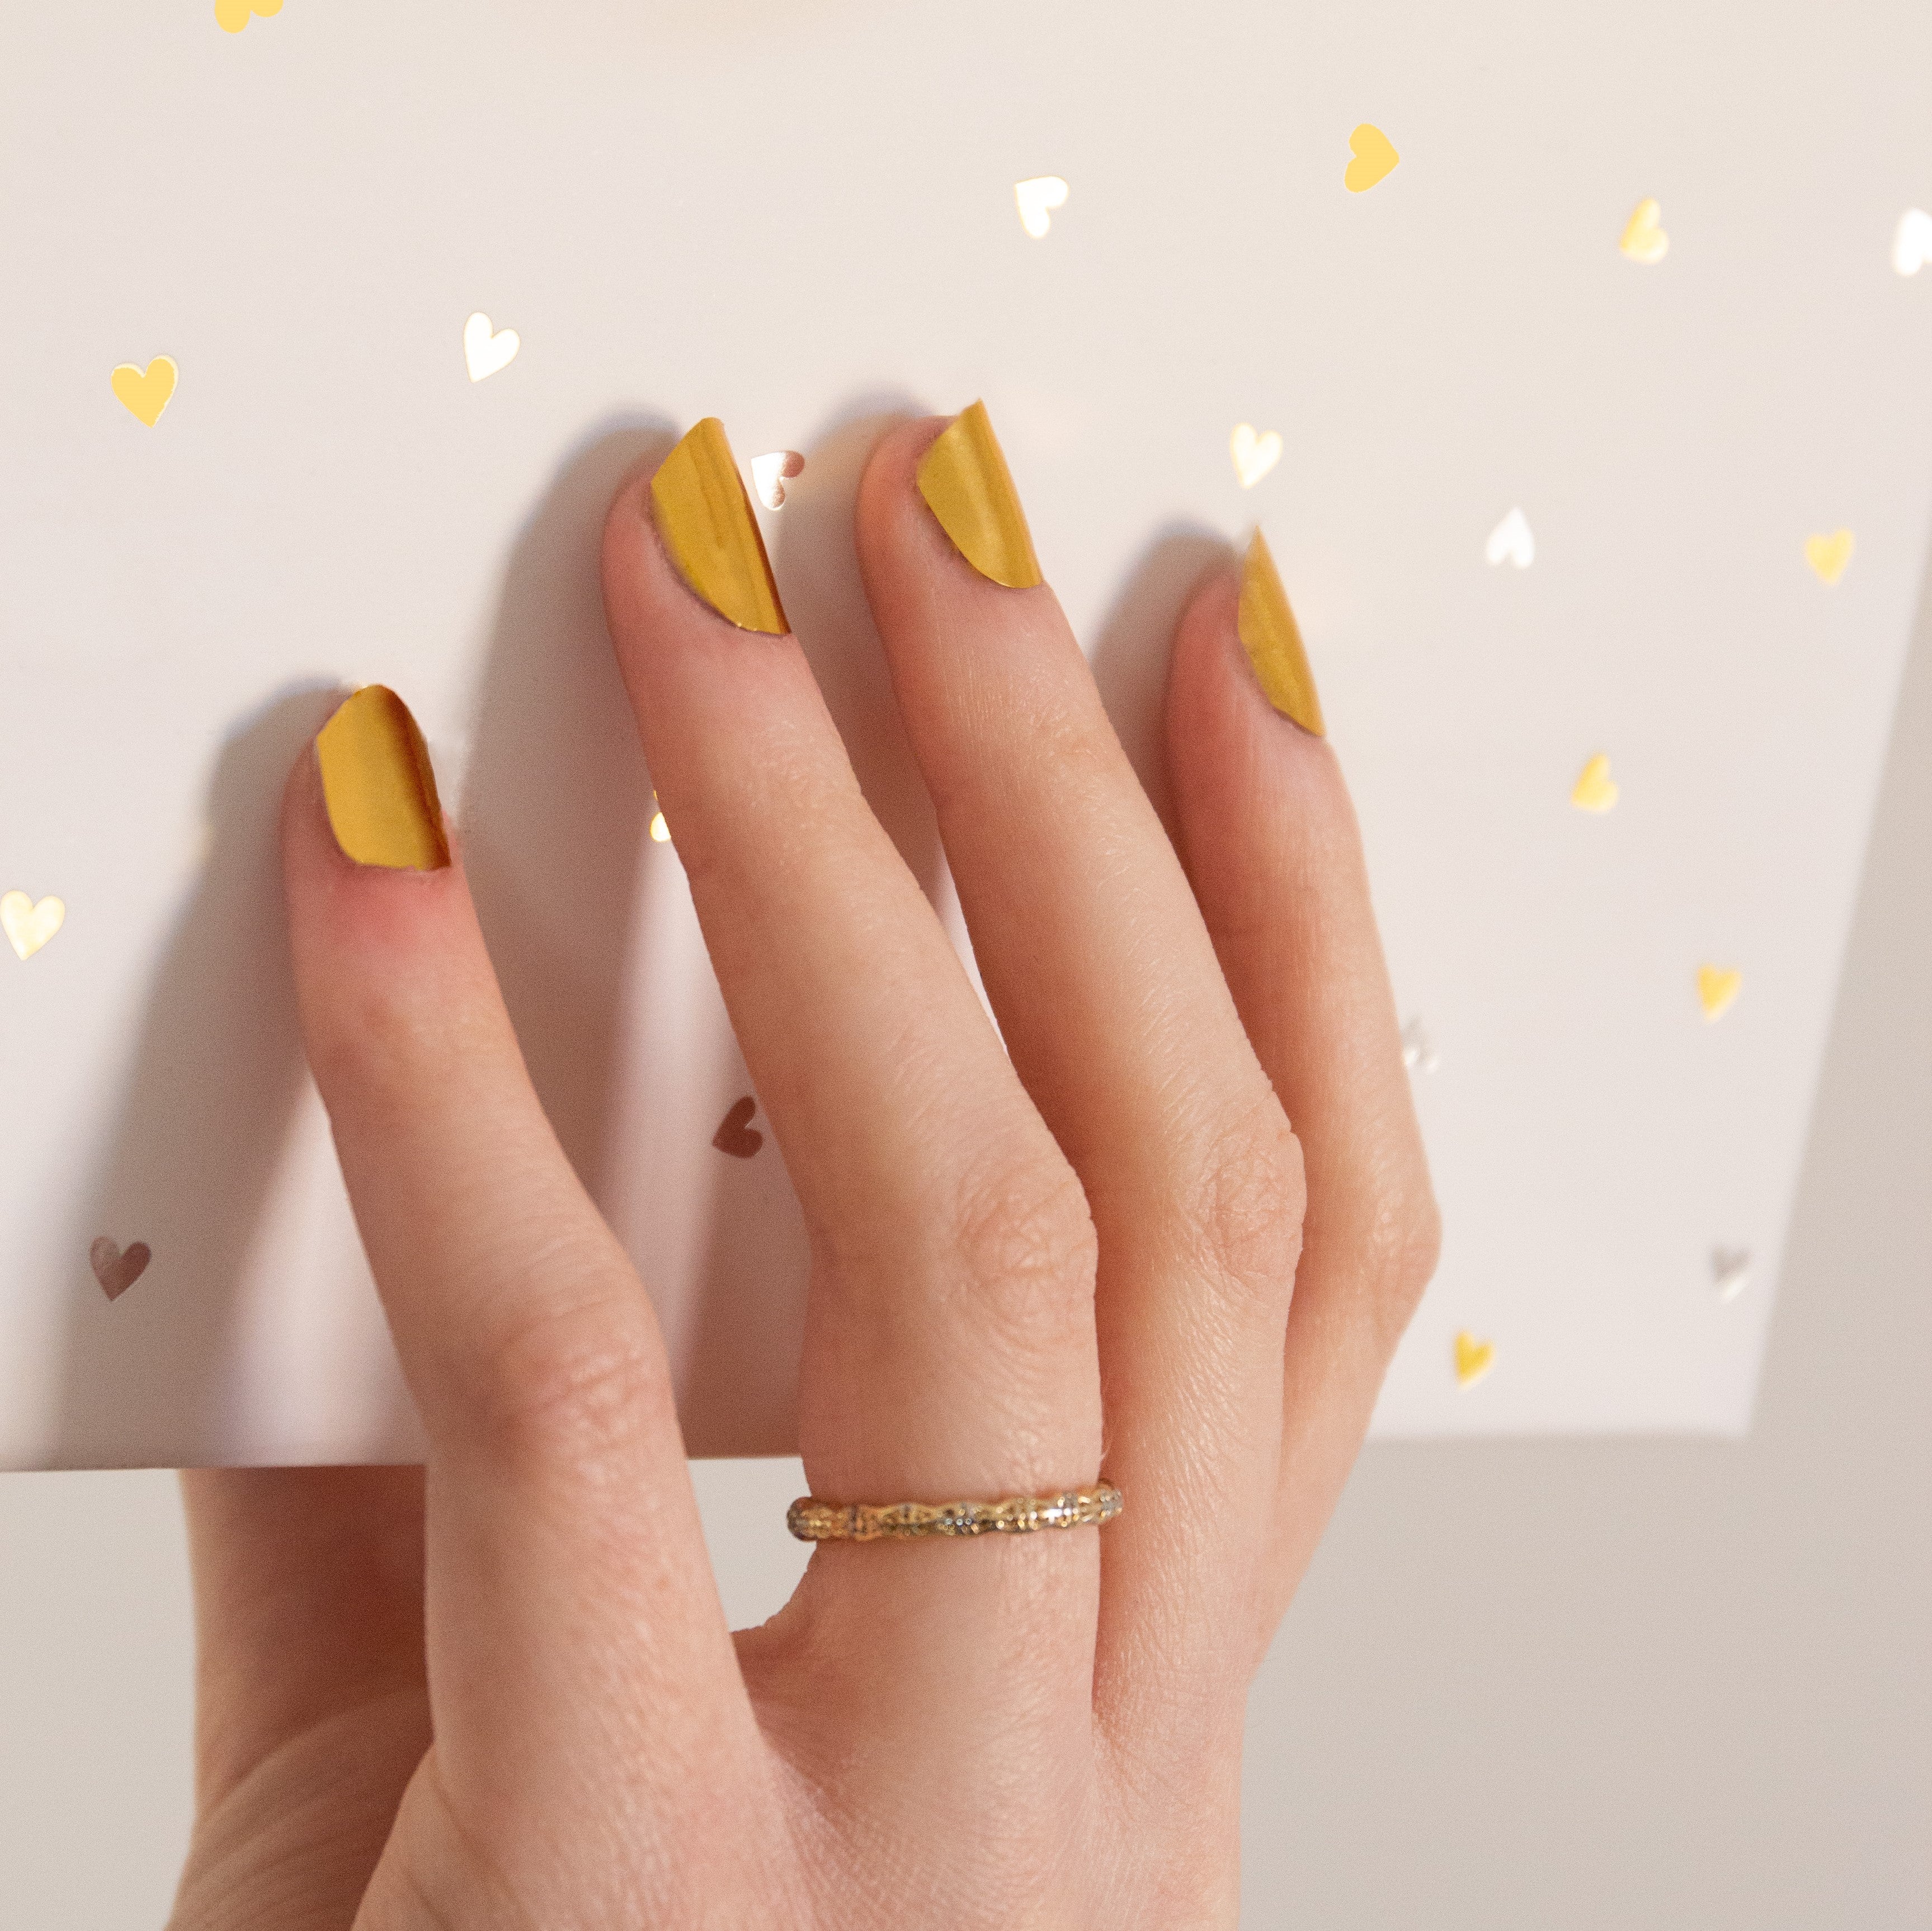 How to Look Like a Total Queen with Metallic Nail Polish wraps